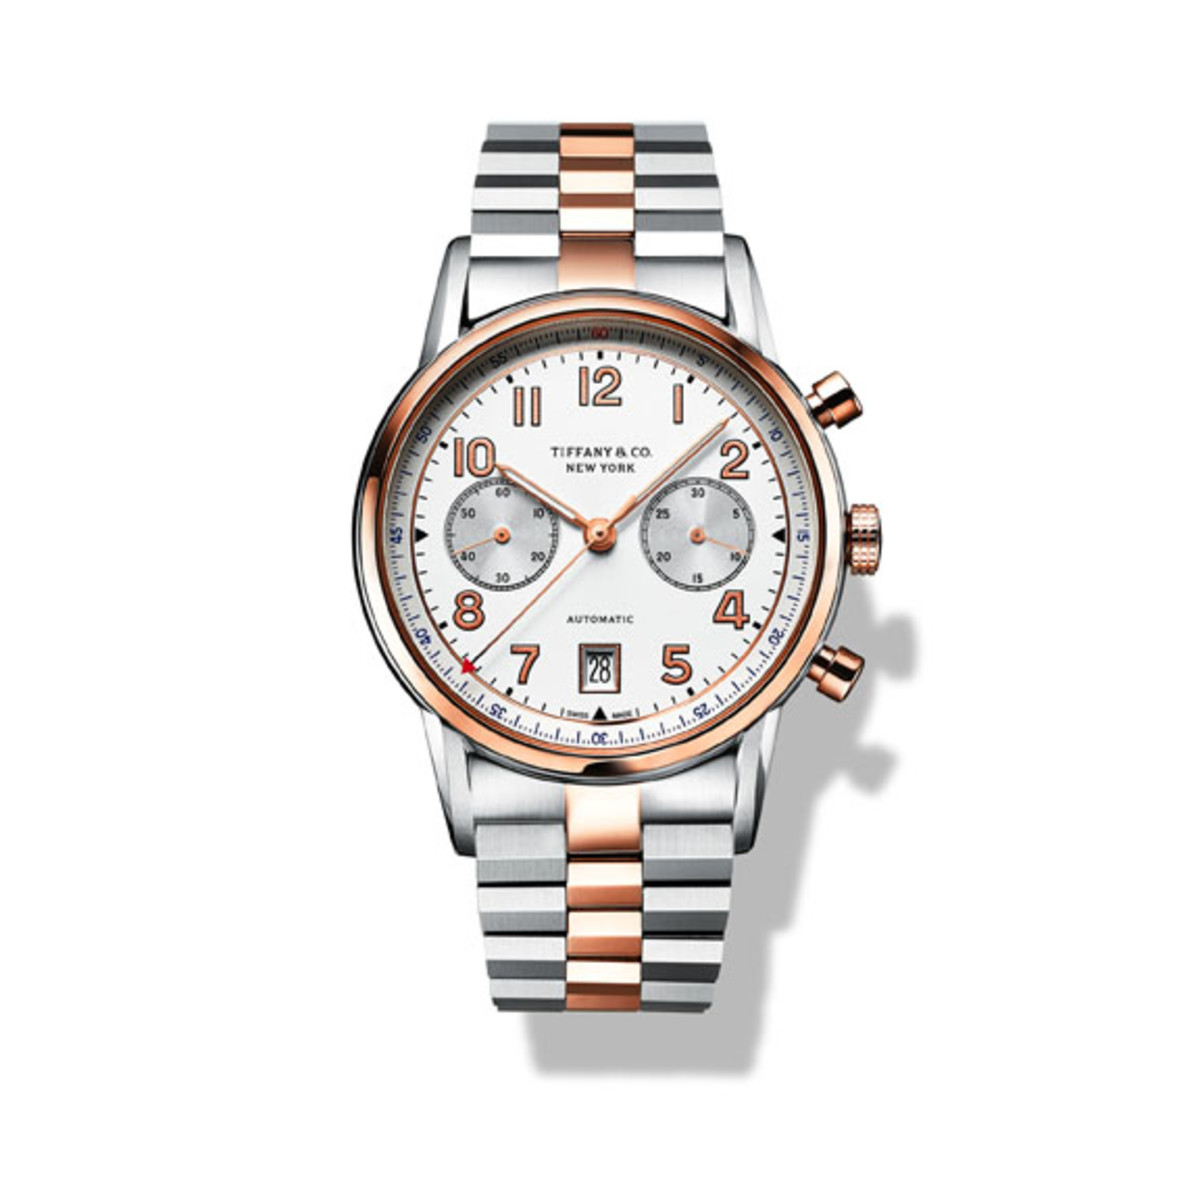 Tiffany CT60R Watch in 18k Rose Gold